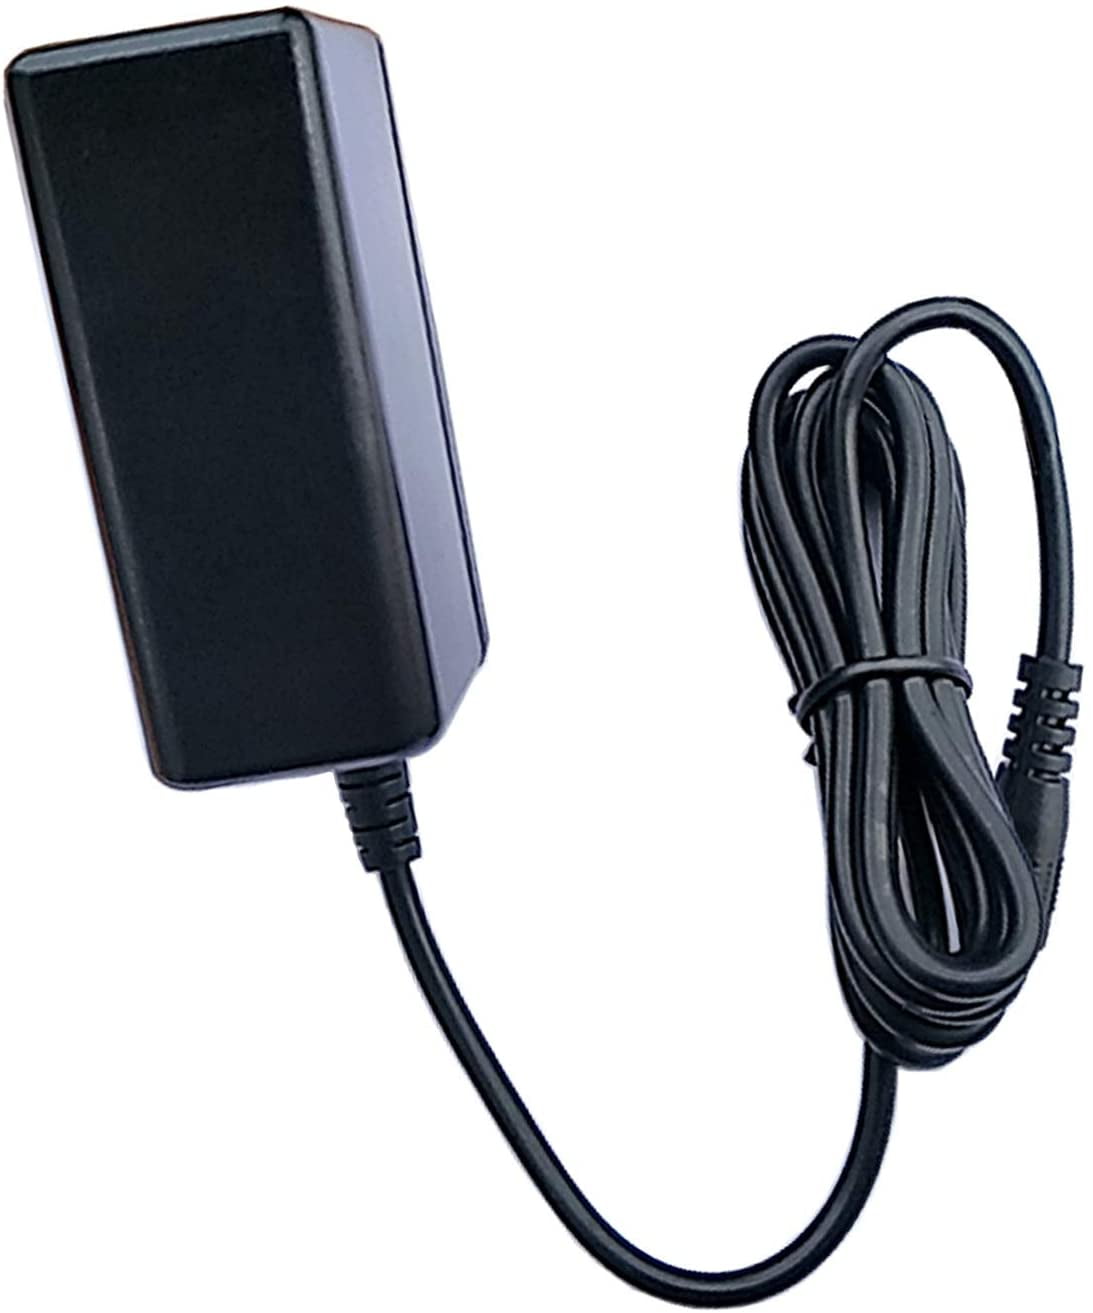 UPBRIGHT AC Adapter Charger for ZyXEL X-550 Xtrememimo Wireless Broadband Router Power Supply